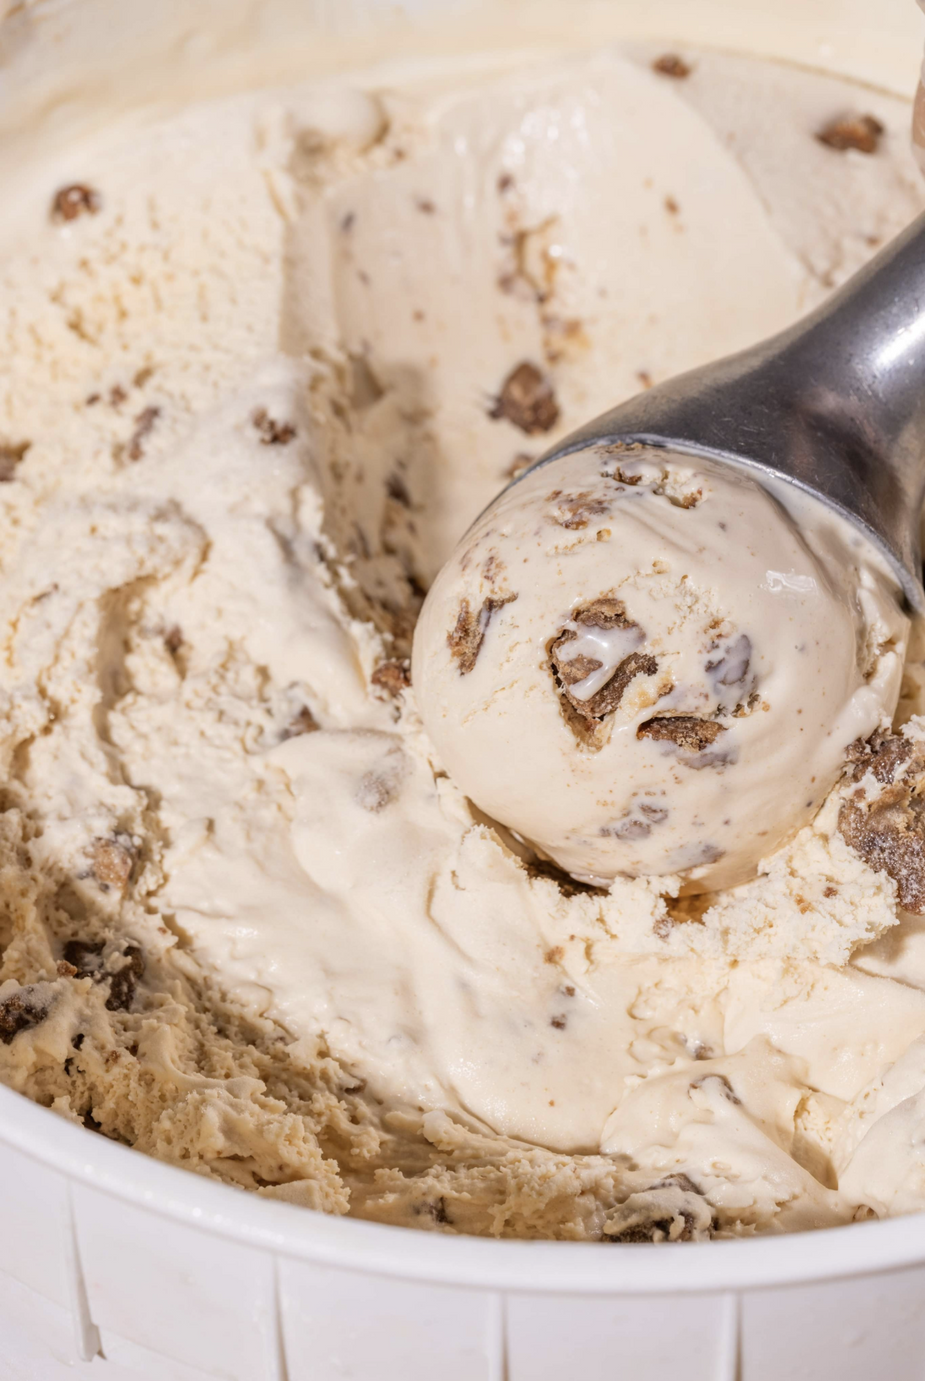 Big Dipper Creamery has three location in the Tulsa area to find the extremely indulgent Cookie Butter Cookie Dough ice cream. Photo courtesy Big Dipper Creamery